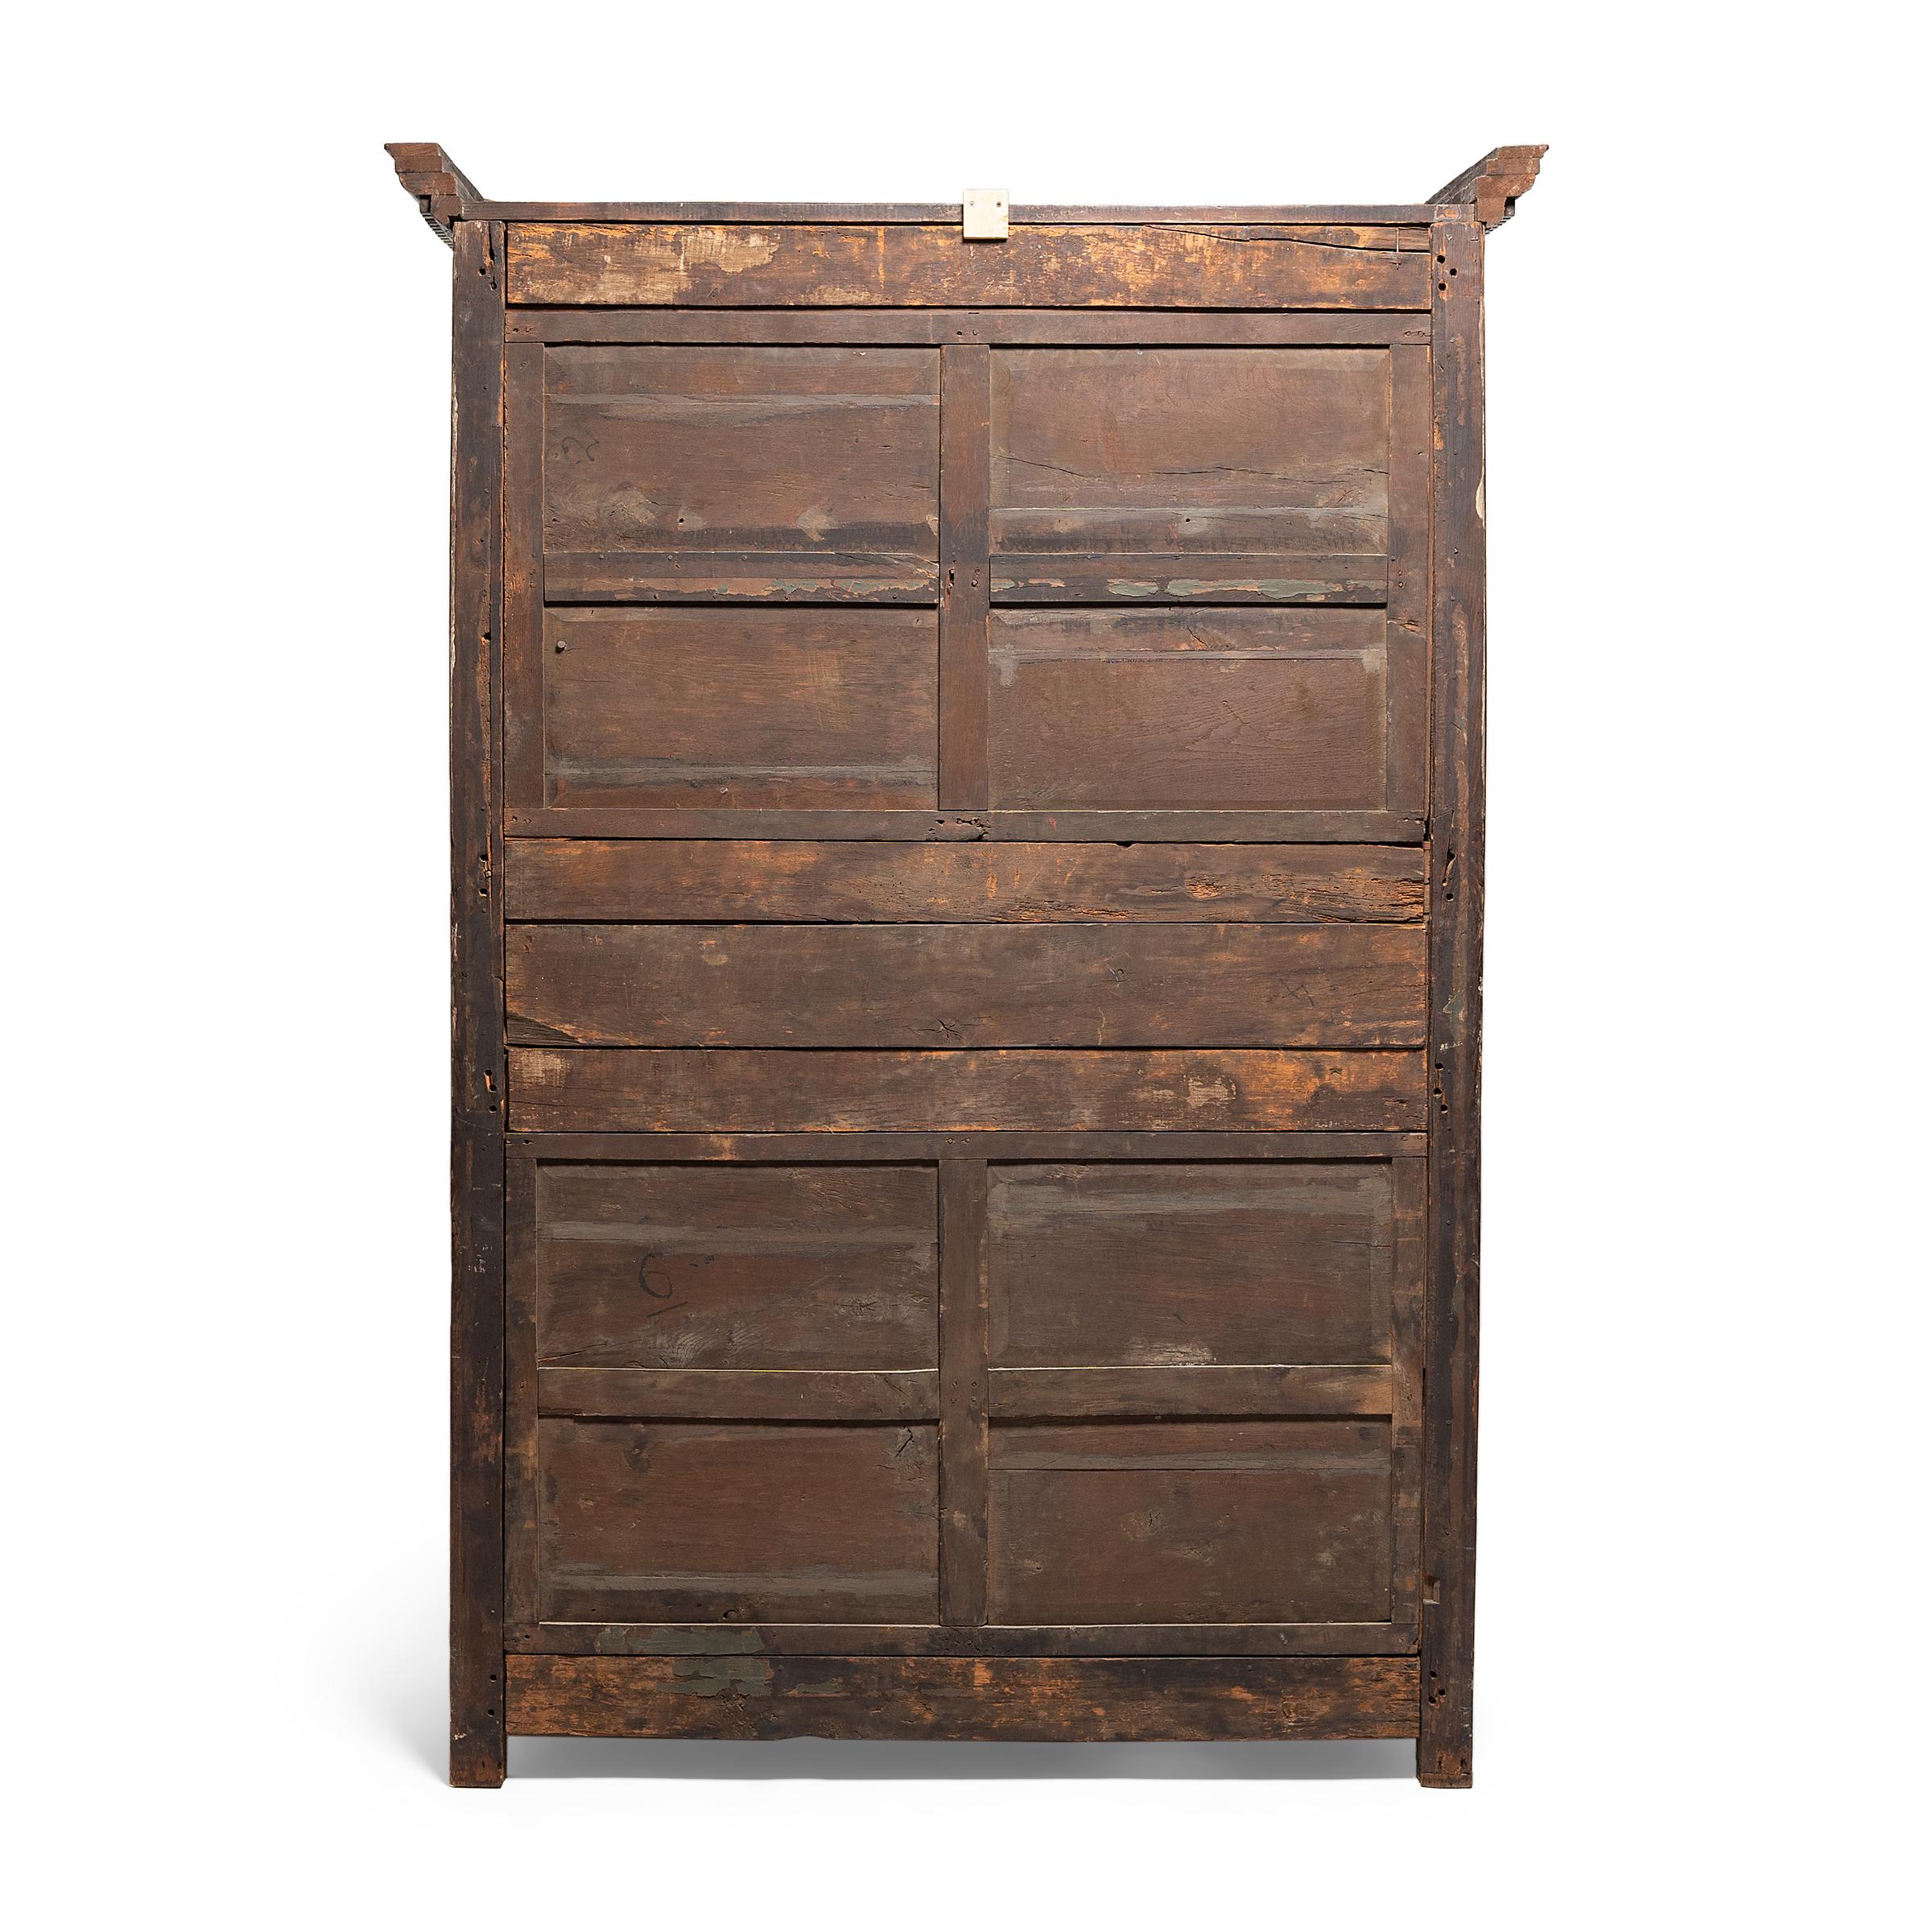 Fabric Grand Renaissance Revival Armoire with Wire Screens, circa 1800 For Sale